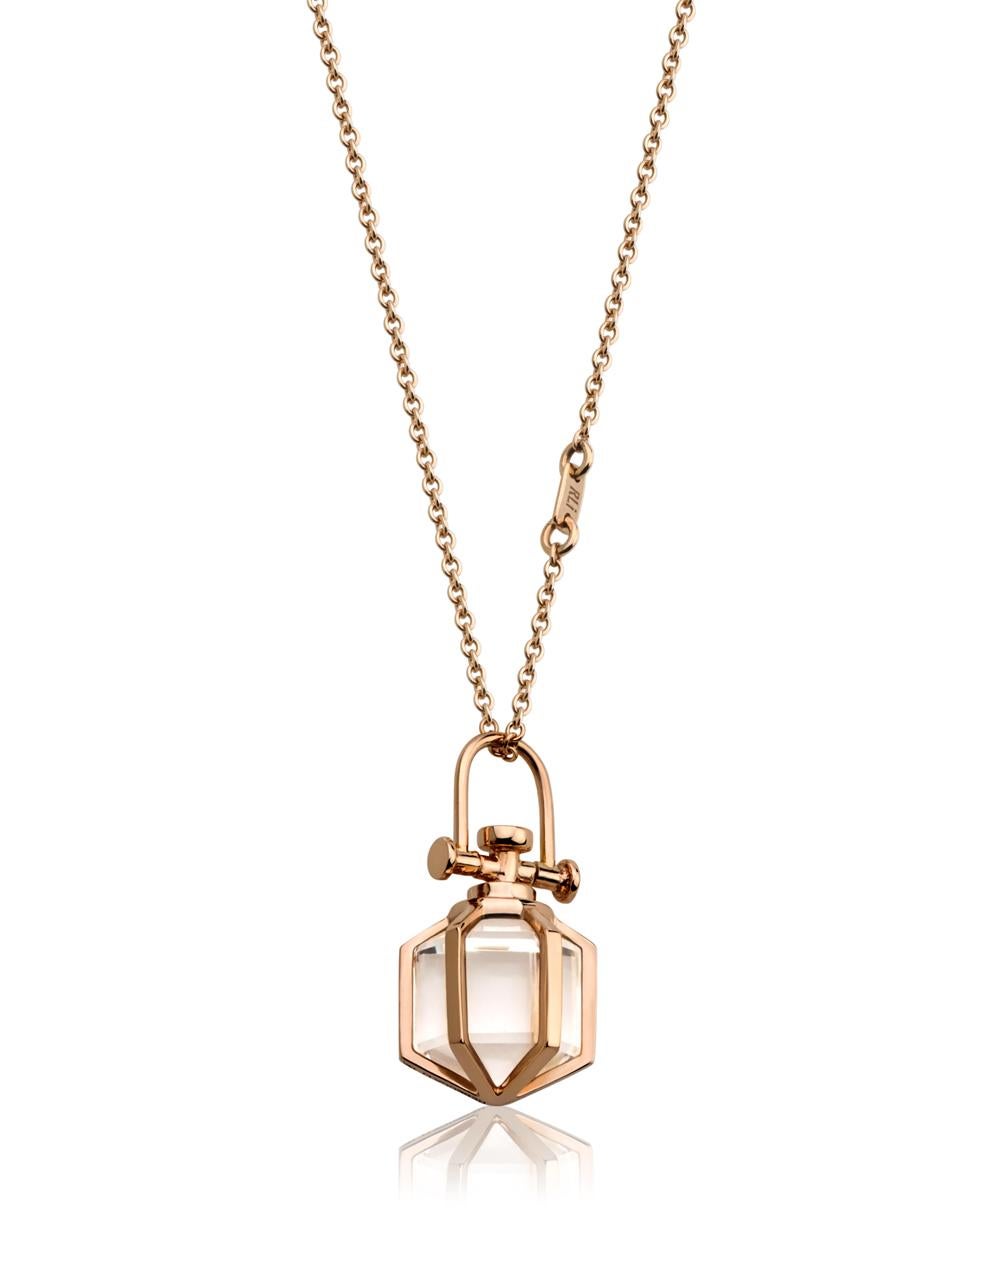 Rebecca Li designs mindfulness.
This sacred geometry inspired necklace  signifies our intuition.
Clear rock crystal means manifestation, positivity & luck.

Talisman Pendant :
18K Rose Gold
Rock Crystal
Pendant Size: 9 mm W * 9 mm D * 18 mm